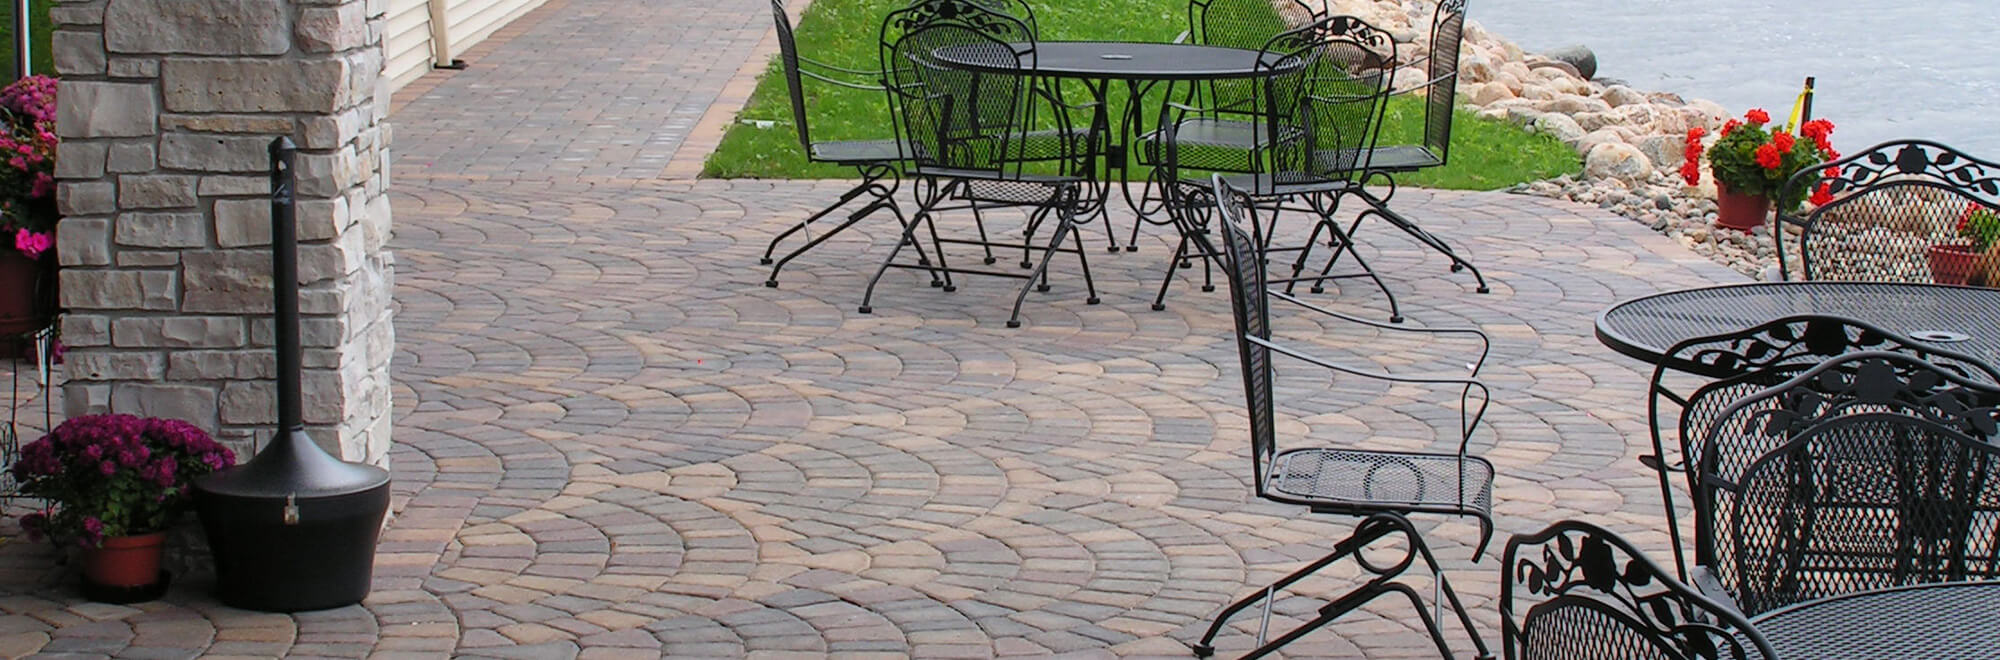 Commercial paver patio installed in an arc pattern